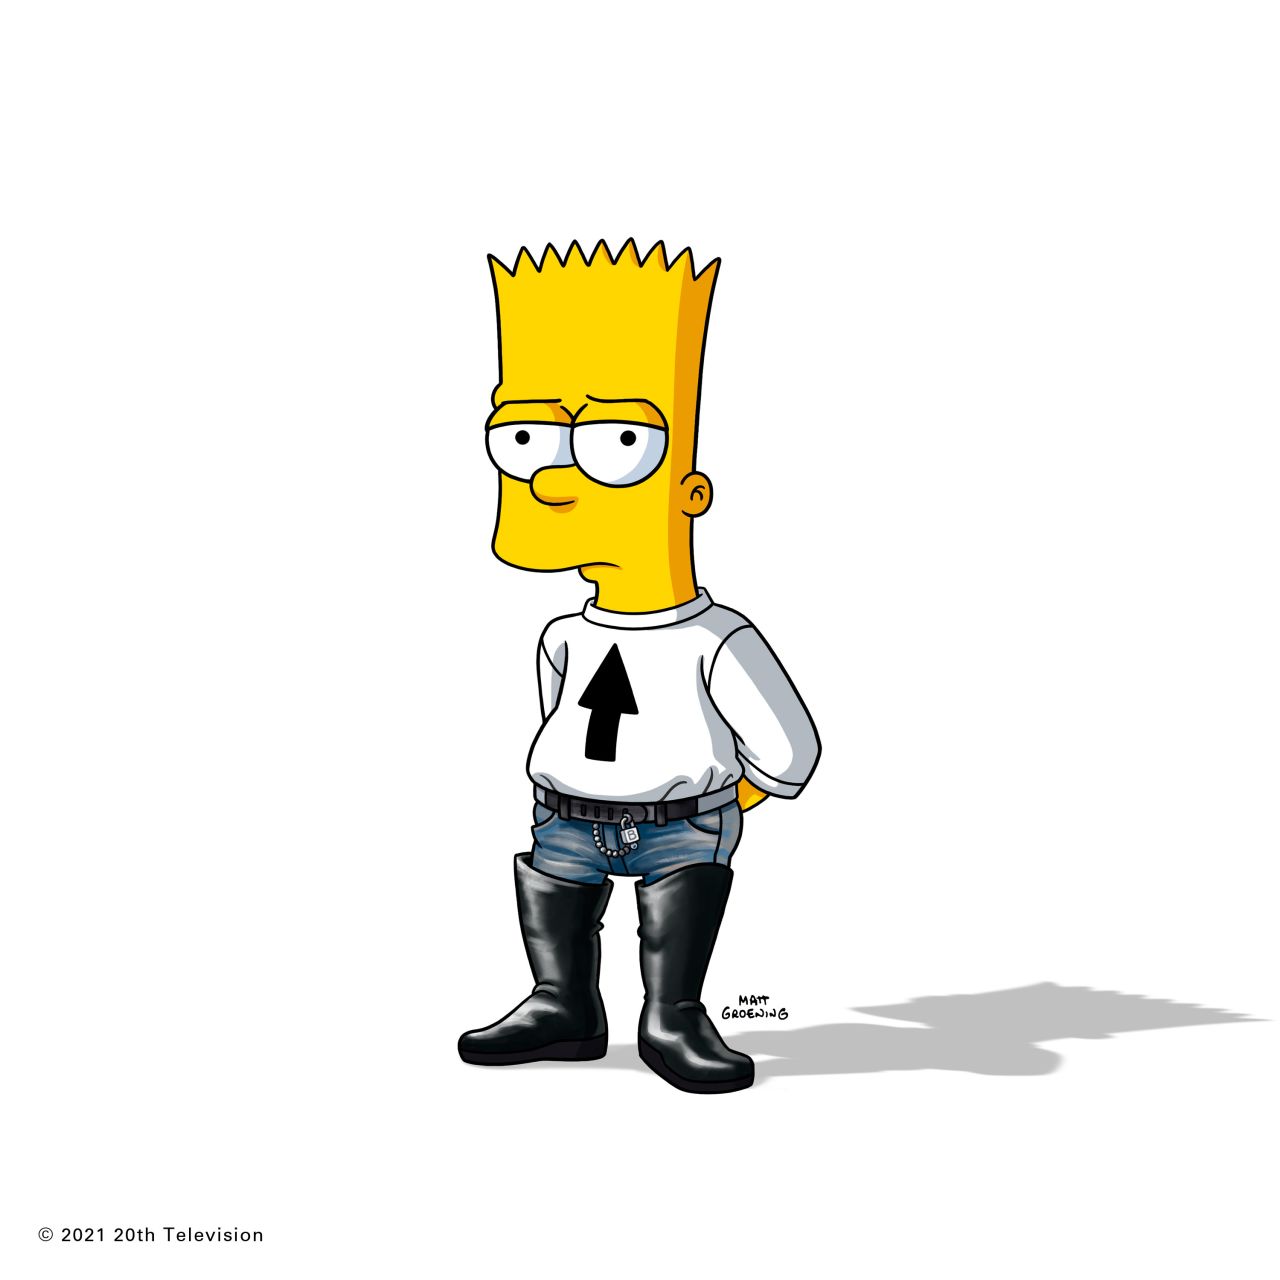 The animated cast of "The Simpsons" have undergone a Balenciaga makeover.